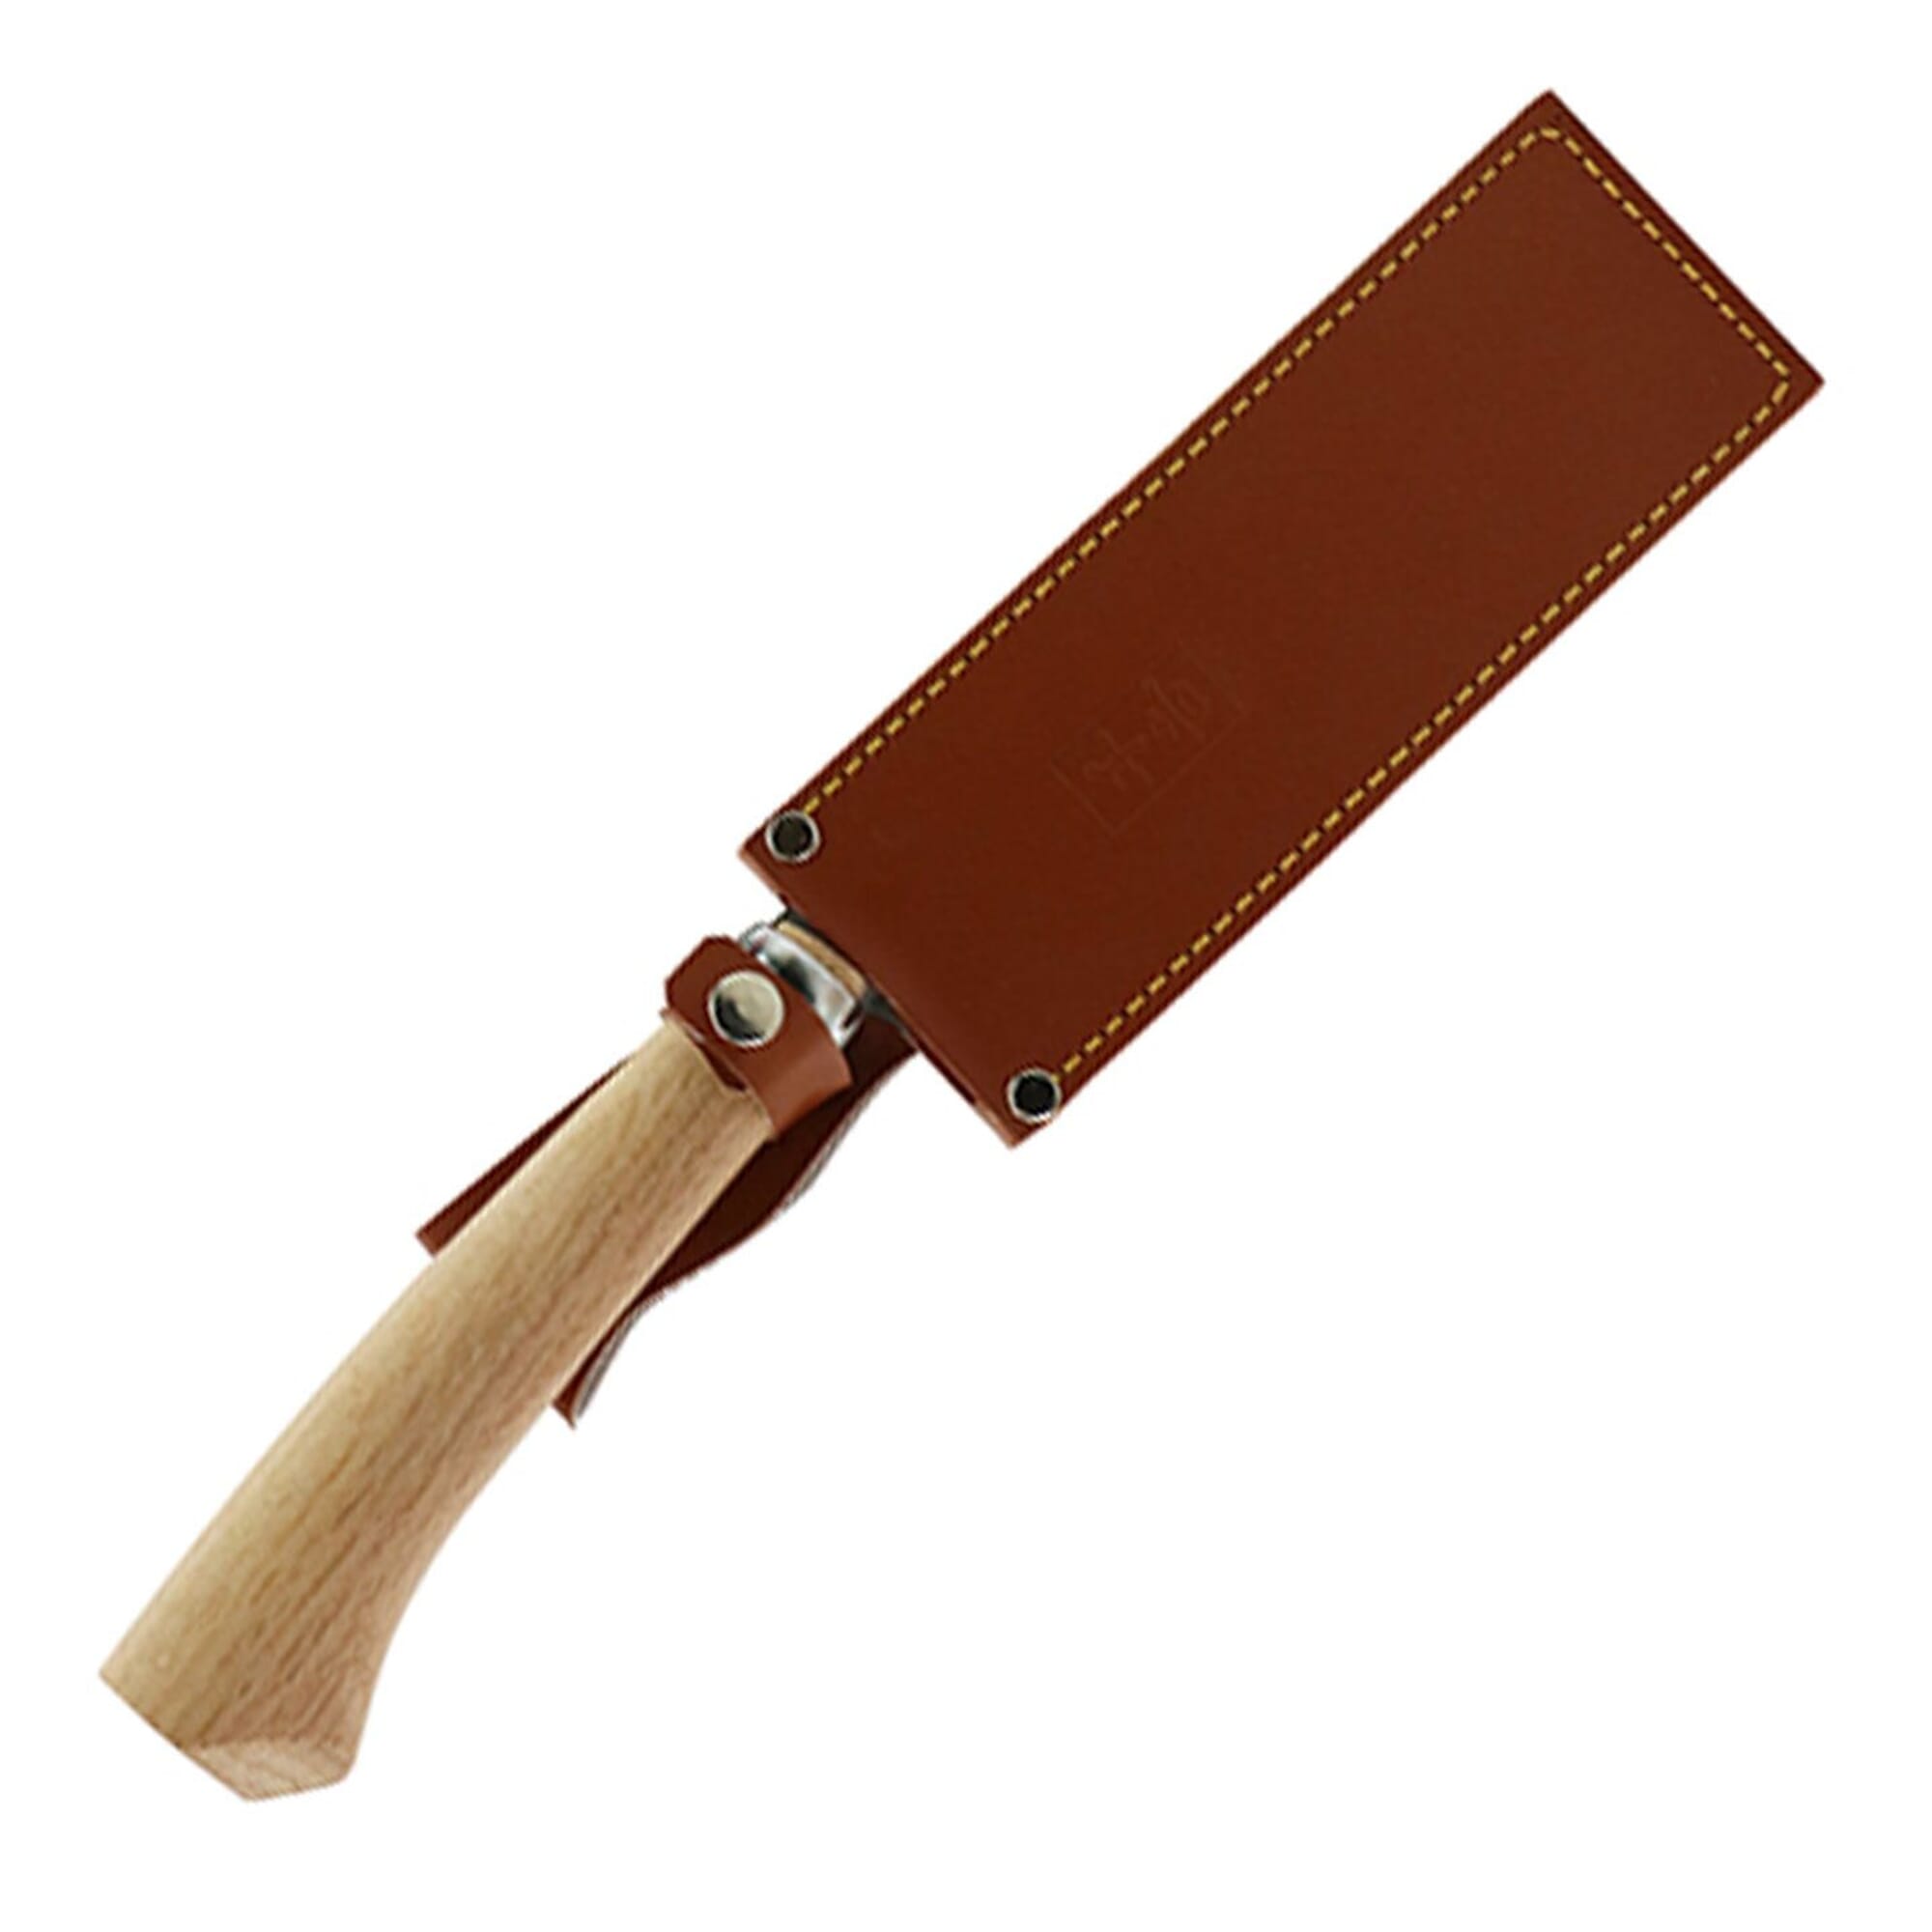 KAKURI Japanese NATA Hatchet Tool with Sheath 7 [Double Bevel] Made in  Japan, All Purpose Garden Axe Tool with Wood Handle for Splitting, Cutting